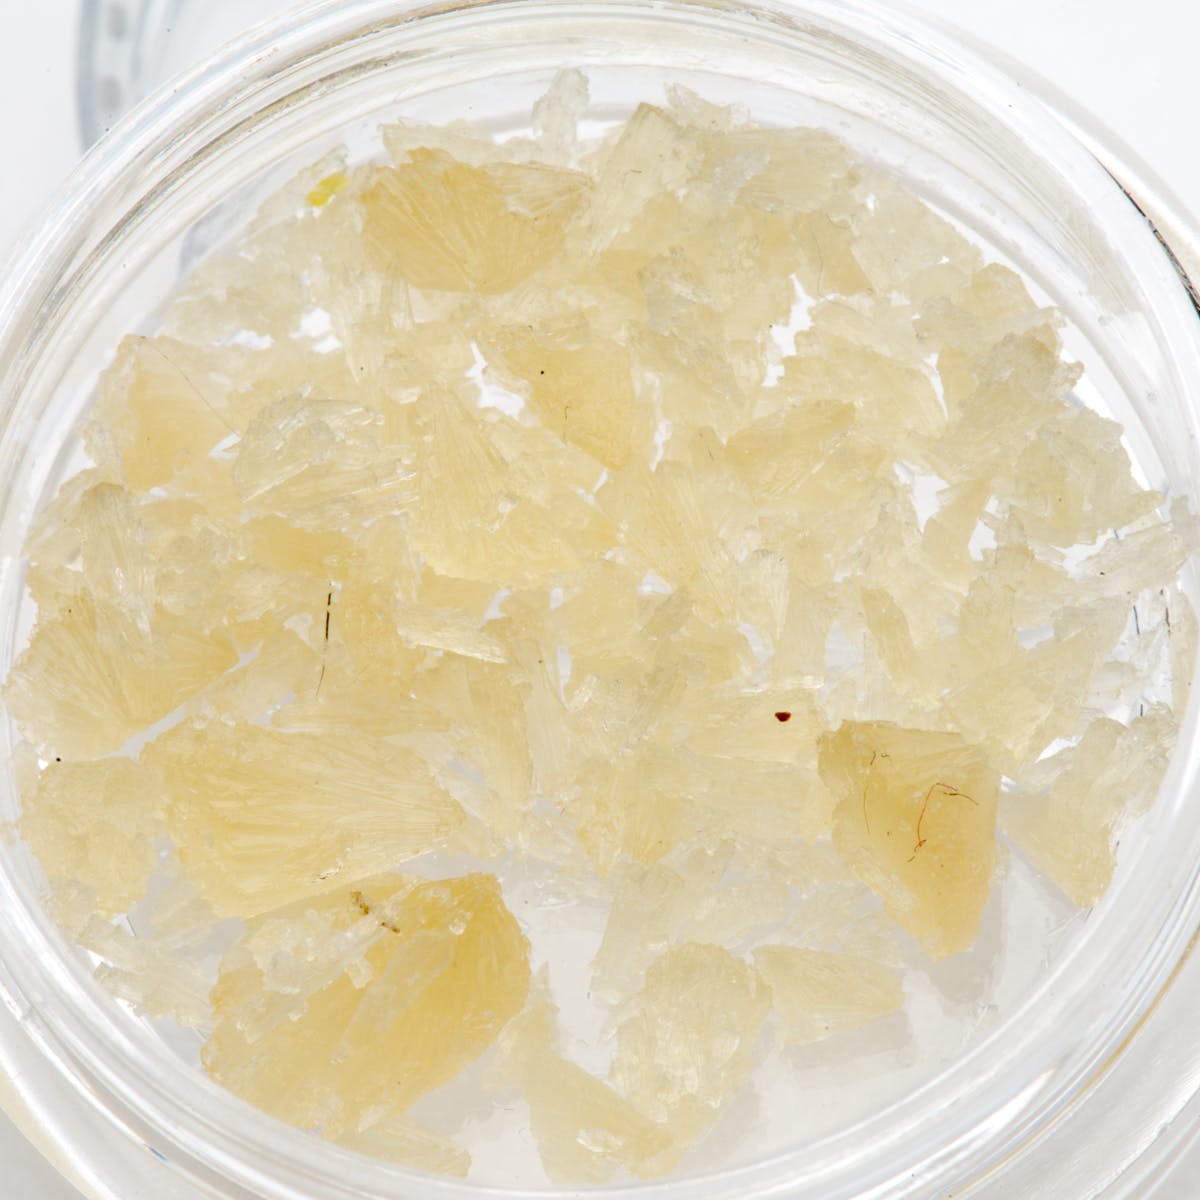 concentrate-pineapple-express-95-25-cbd-shatter